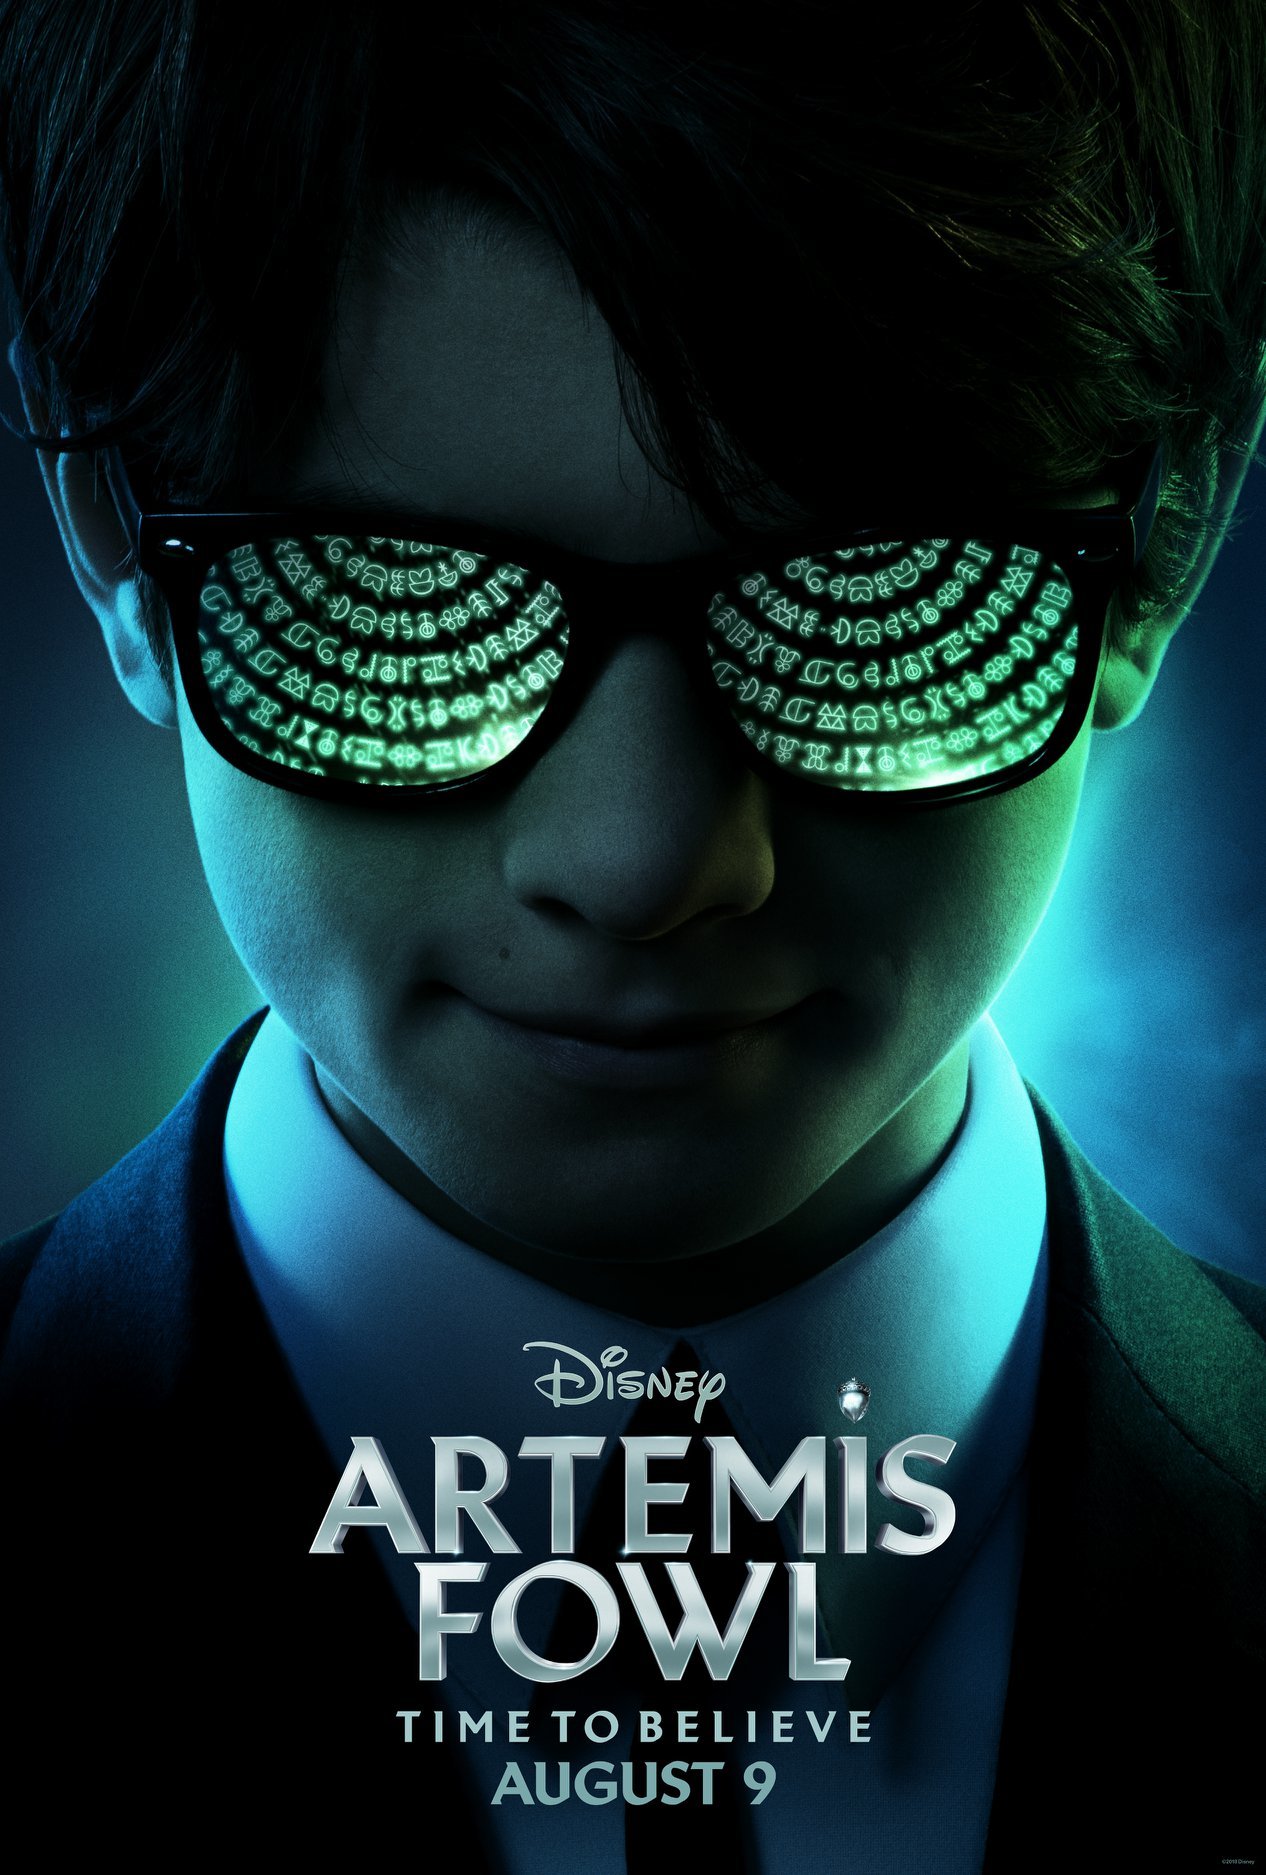 Artemis fowl is coming to theater near you in 2020